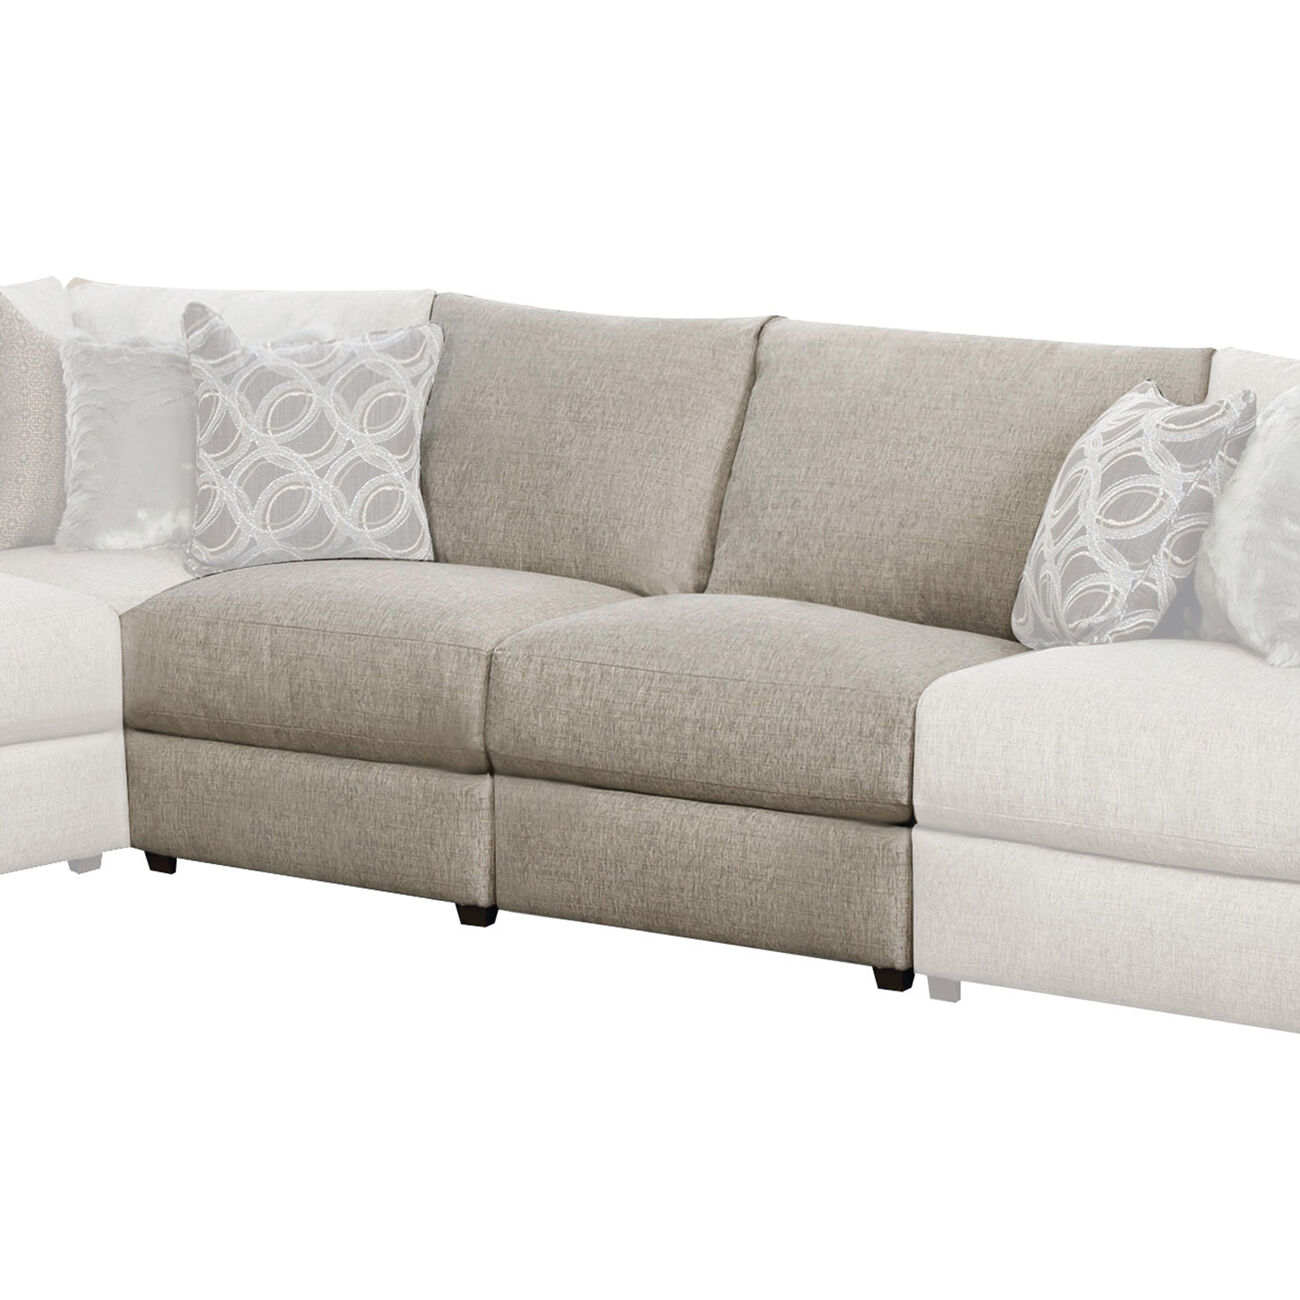 Fabric Upholstered Contemporary Style Wooden Armless Loveseat, Beige